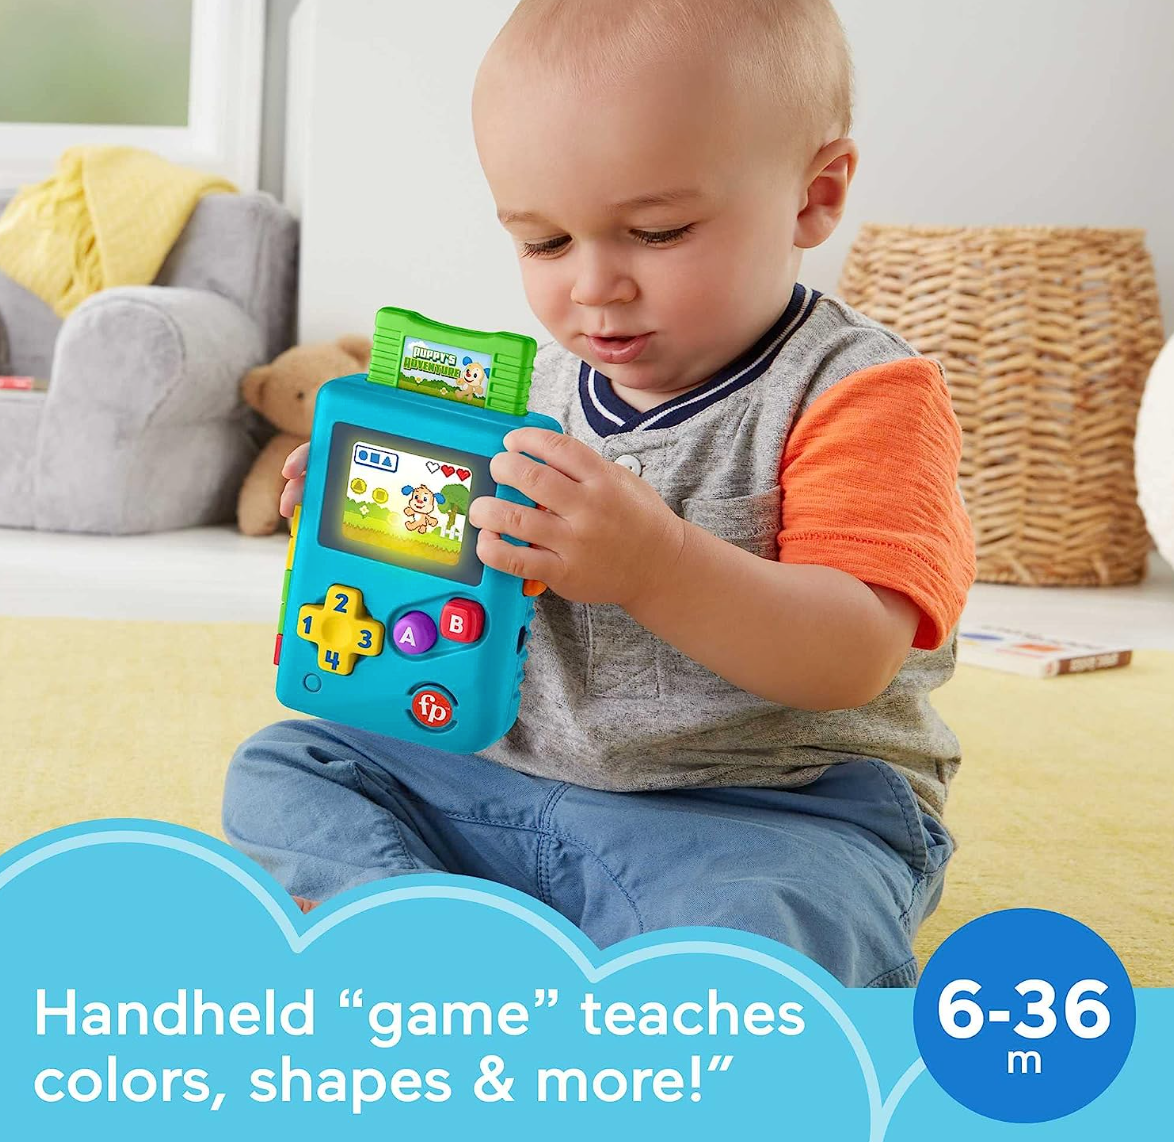 Fisher-Price Laugh & Learn Baby & Toddler Toy Lil’ Gamer Pretend Video Game with Lights & Learning Songs for Ages 6+ Months,Blue